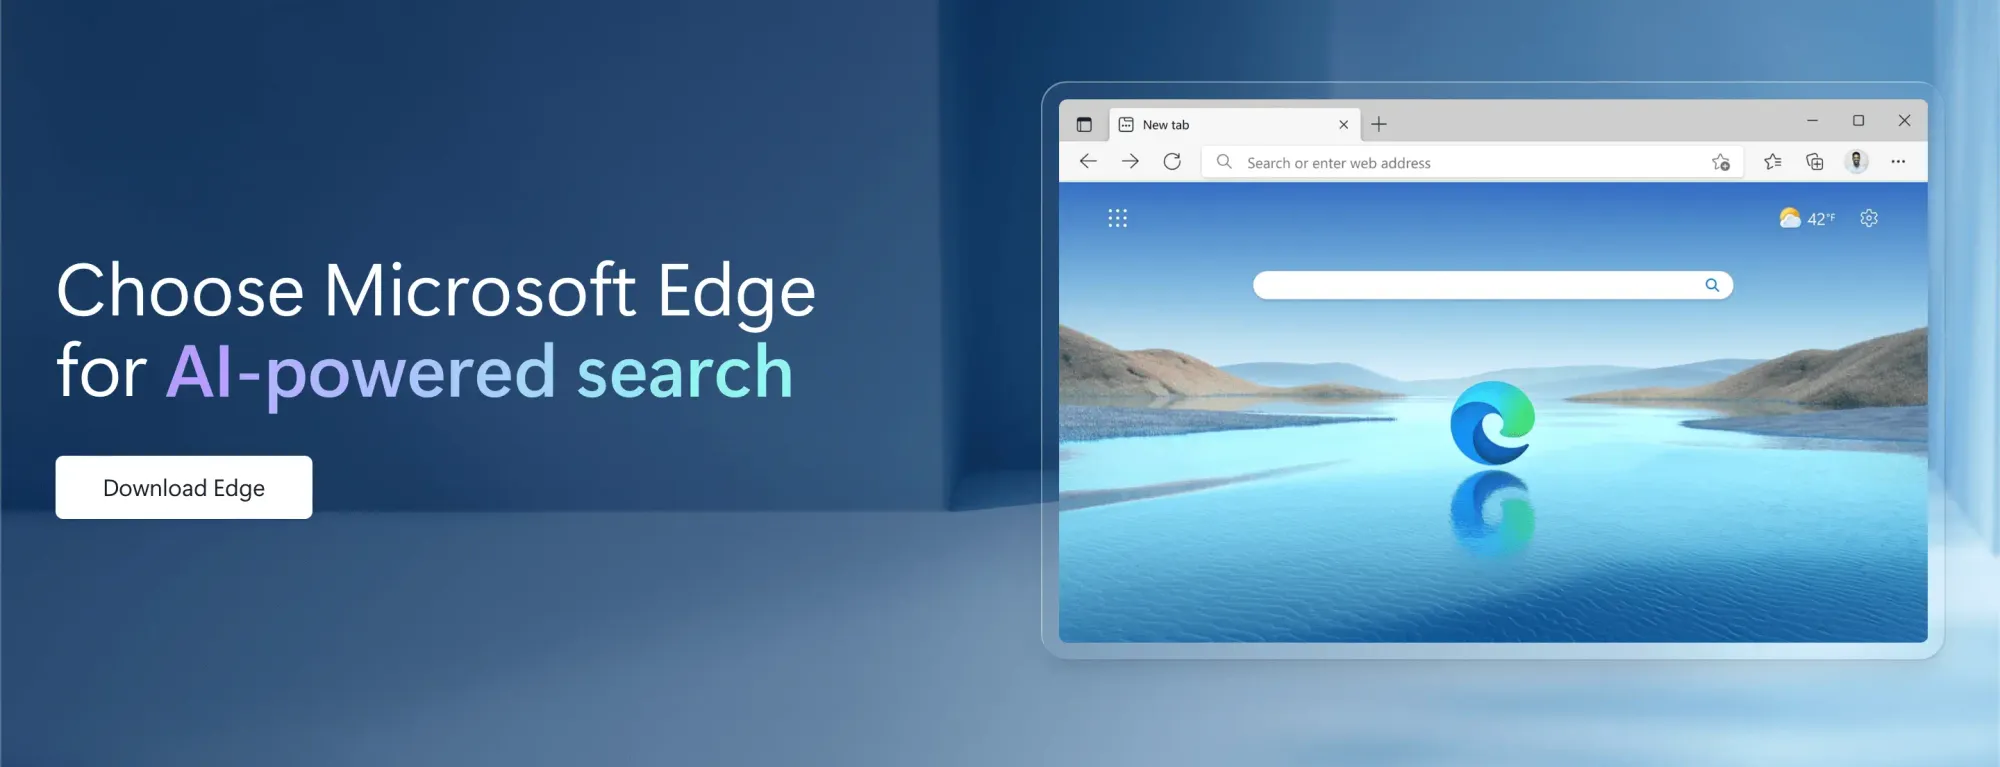 microsoft-launches-the-new-bing-and-edge